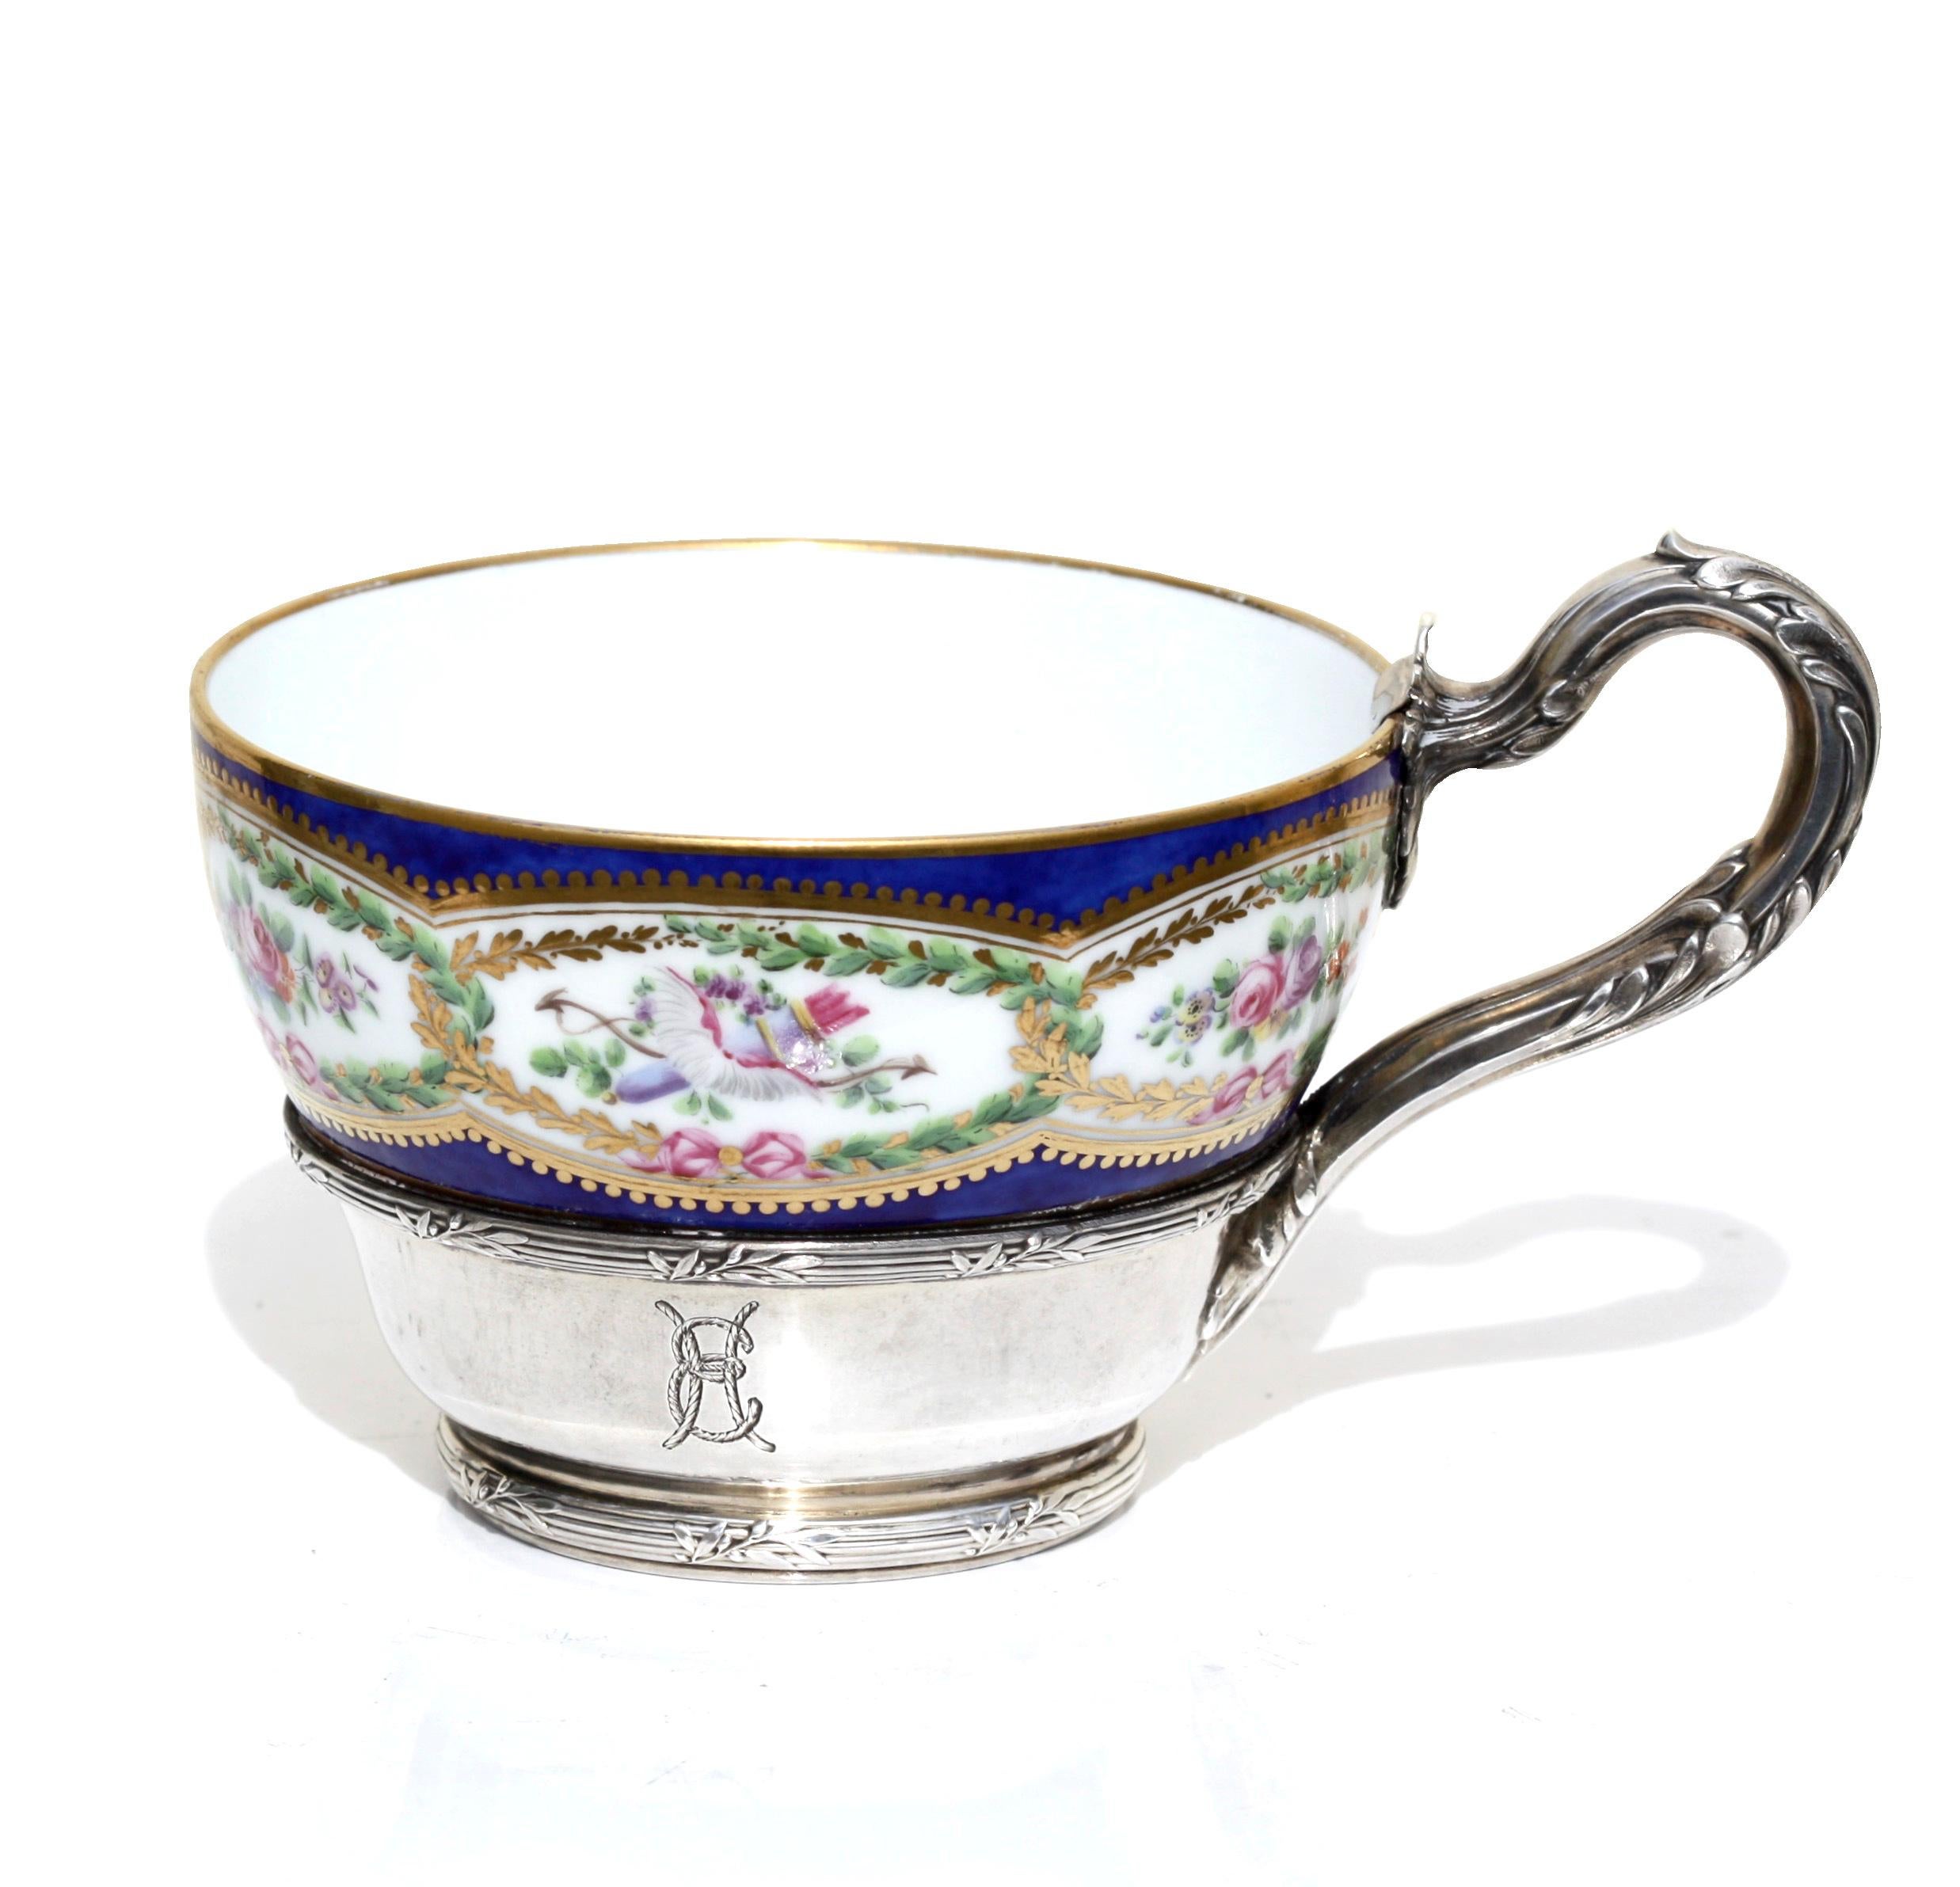 A fine porcelain silver mounted teacup and saucer, 19th century
the exteriors finely painted with colorful floral arrangements, blue printed factory marks.
Measures: Diameter of saucer 6 1/4 in.
15.2 cm.

   